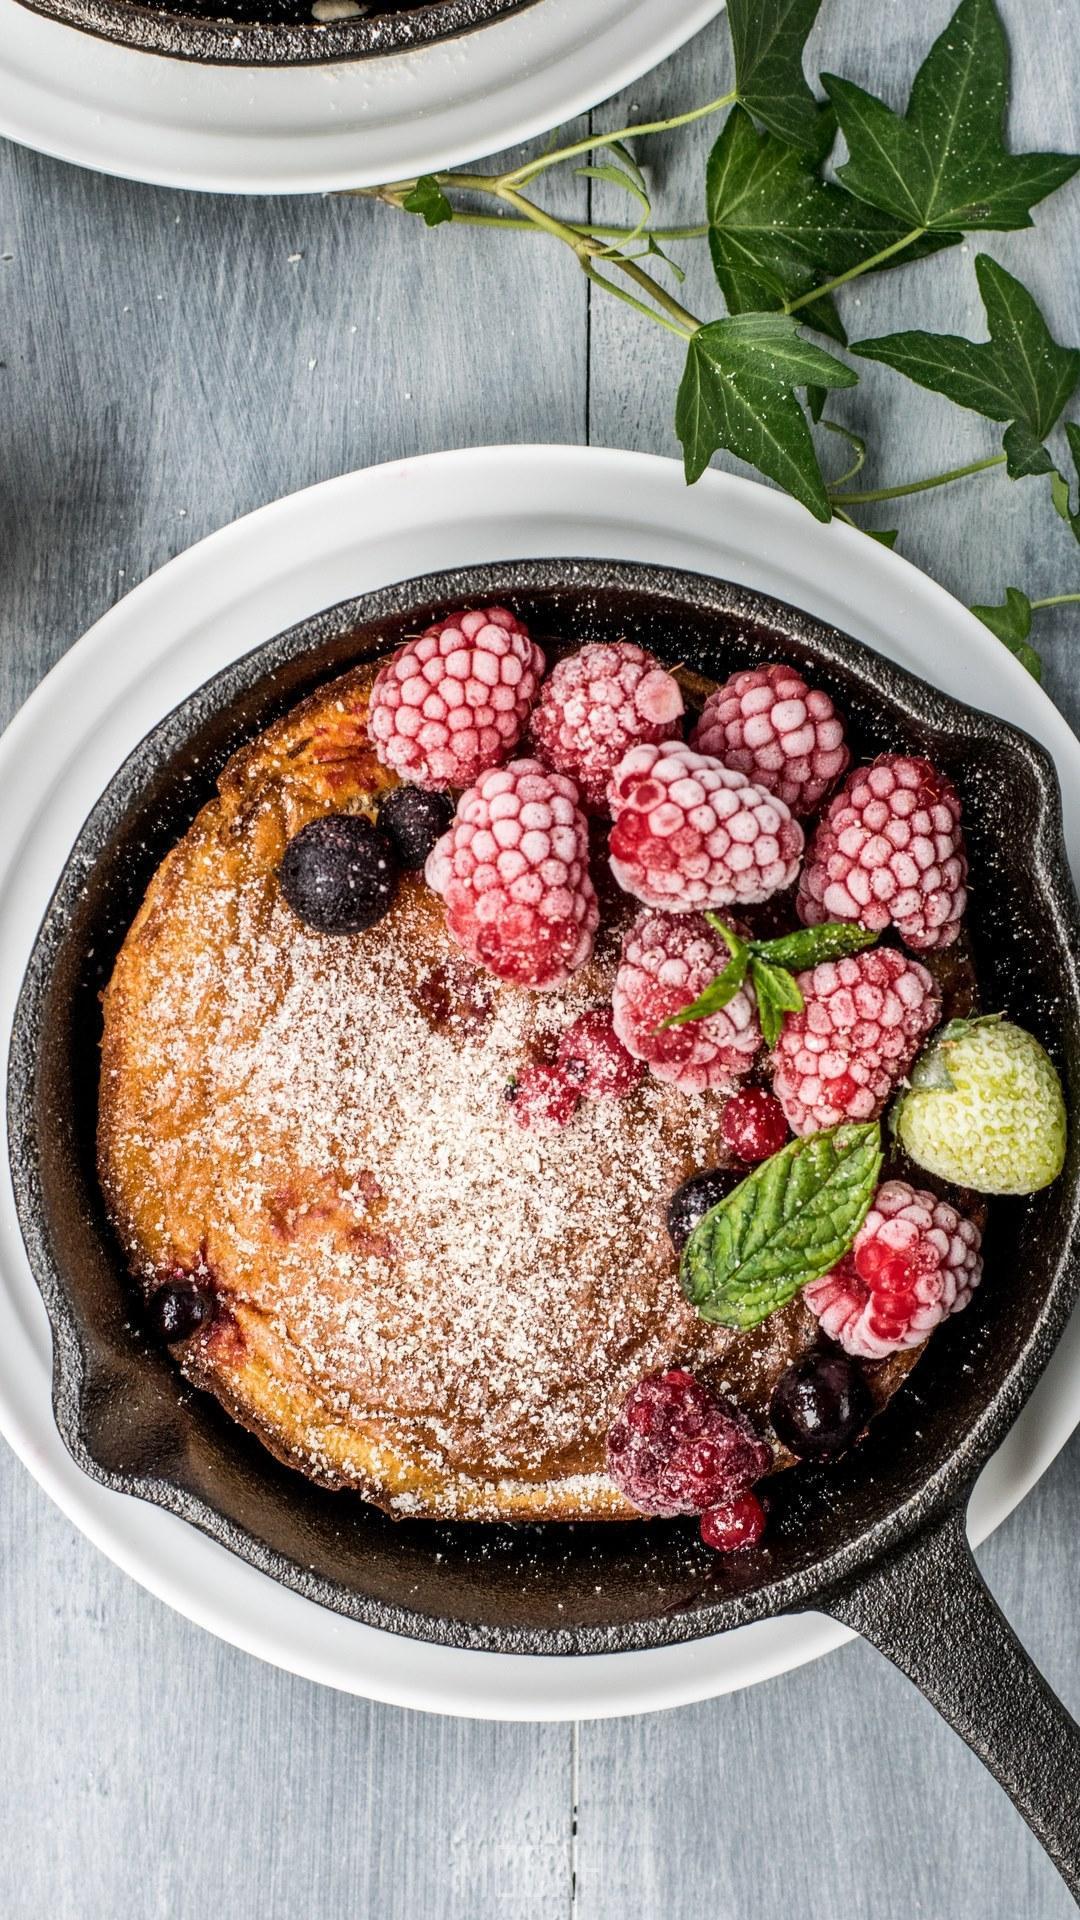 HD wallpaper, Rustic Cast Iron Skillet Cake With Berries And Powdered Sugar, 1080X1920, Dutch Baby Pancake, Xiaomi Redmi Note 4X Wallpaper Free Download